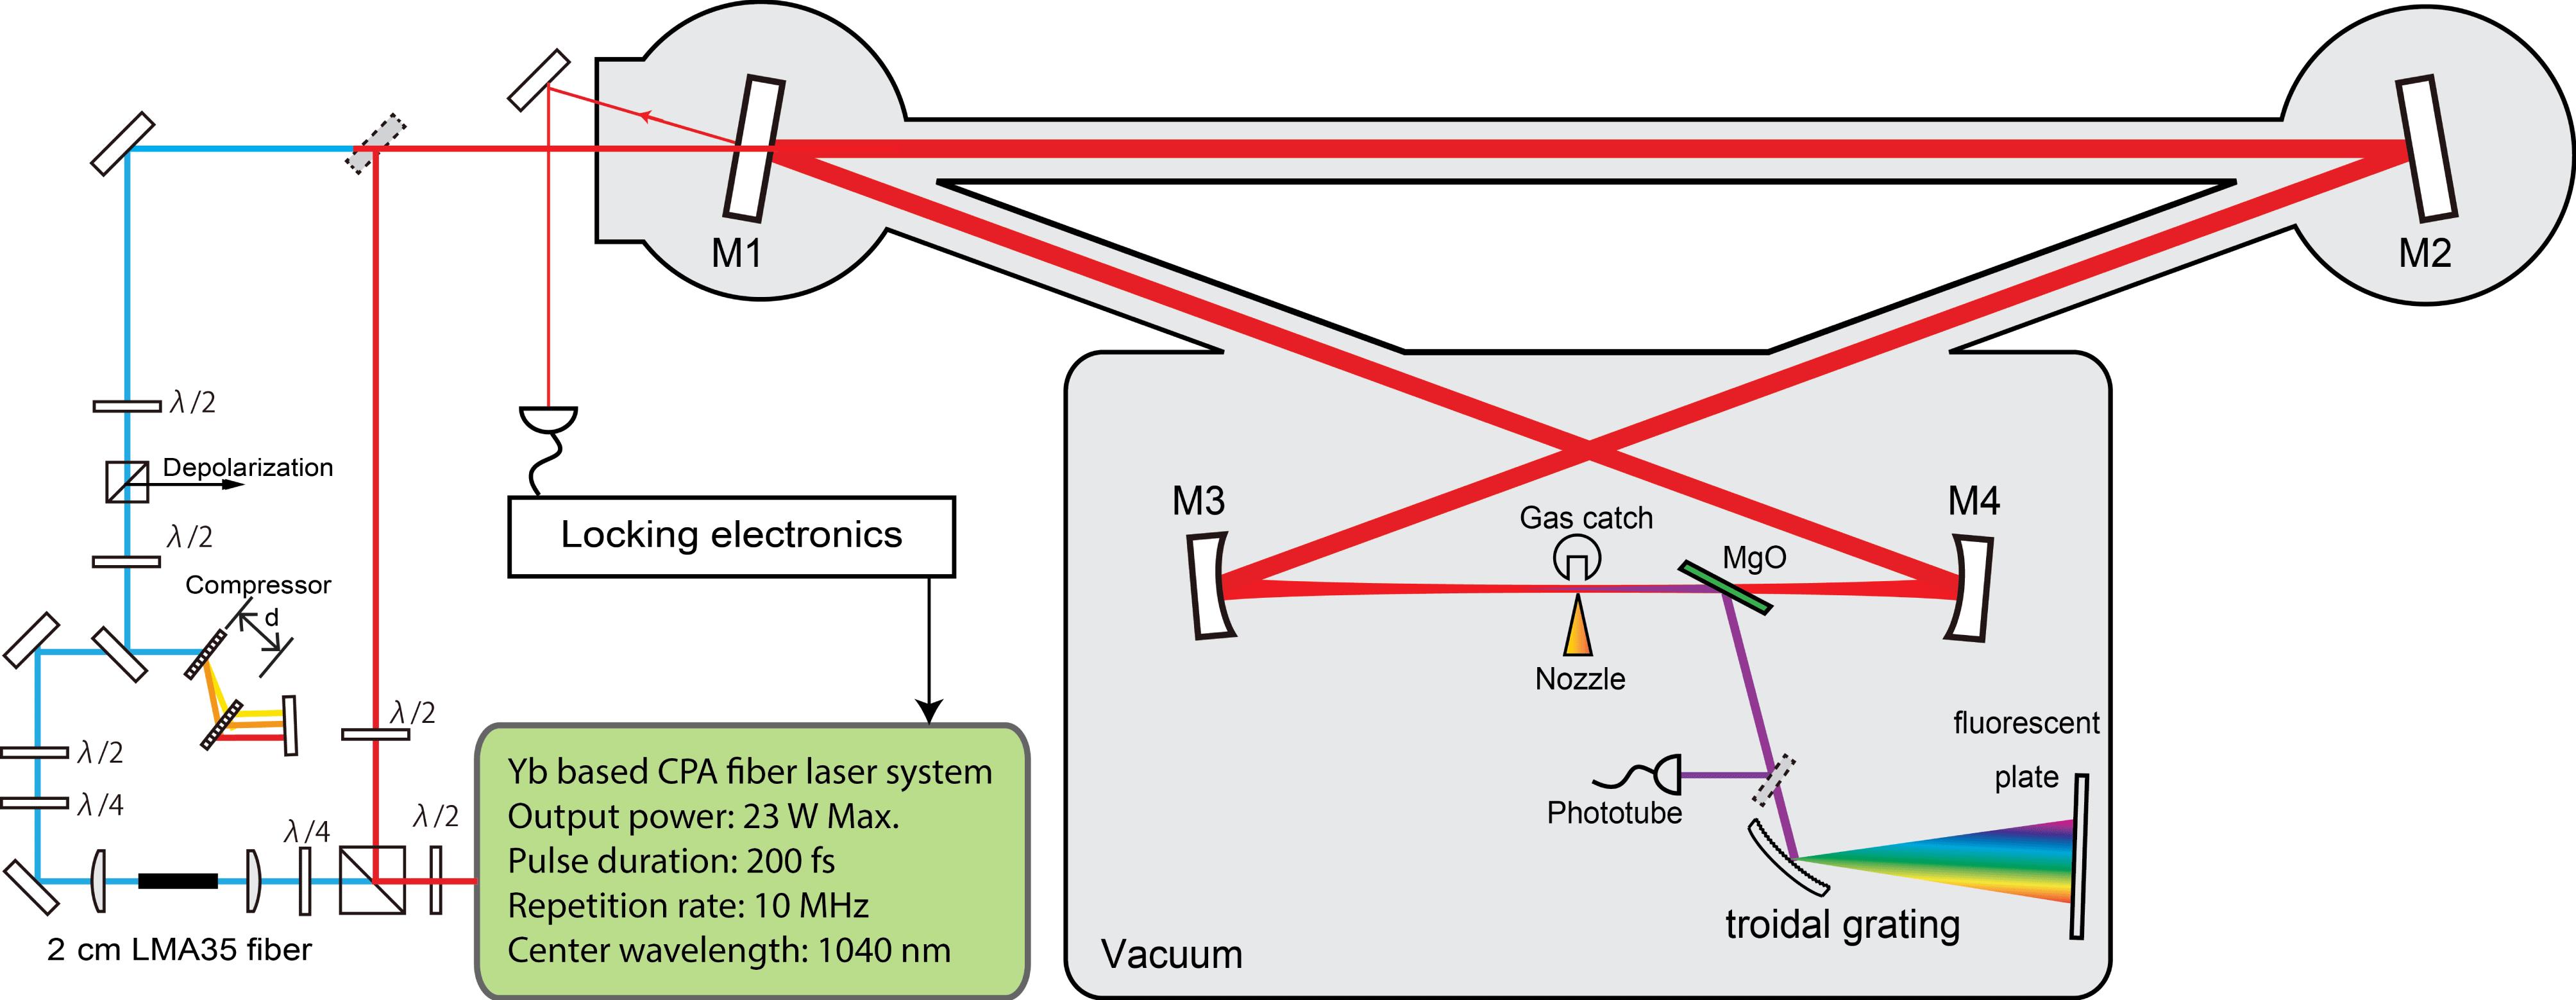 Schematic of the experimental setup, which consists of an Yb-fiber-based CPA driving laser, an LMA fiber based pulse compressor, PDH locking electronics and a large-scale bow-tie enhancement cavity.